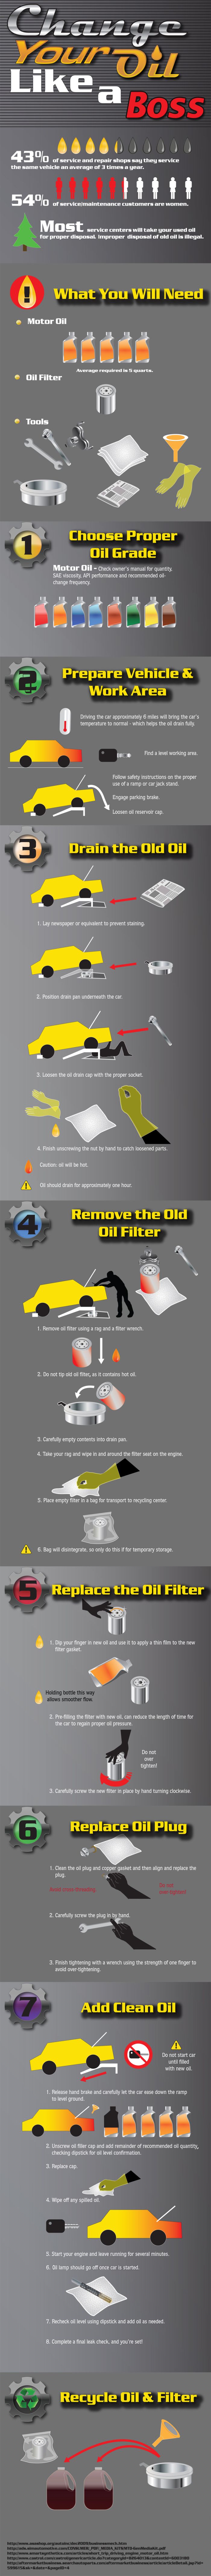 Change Your Oil Like a Boss (infographic)